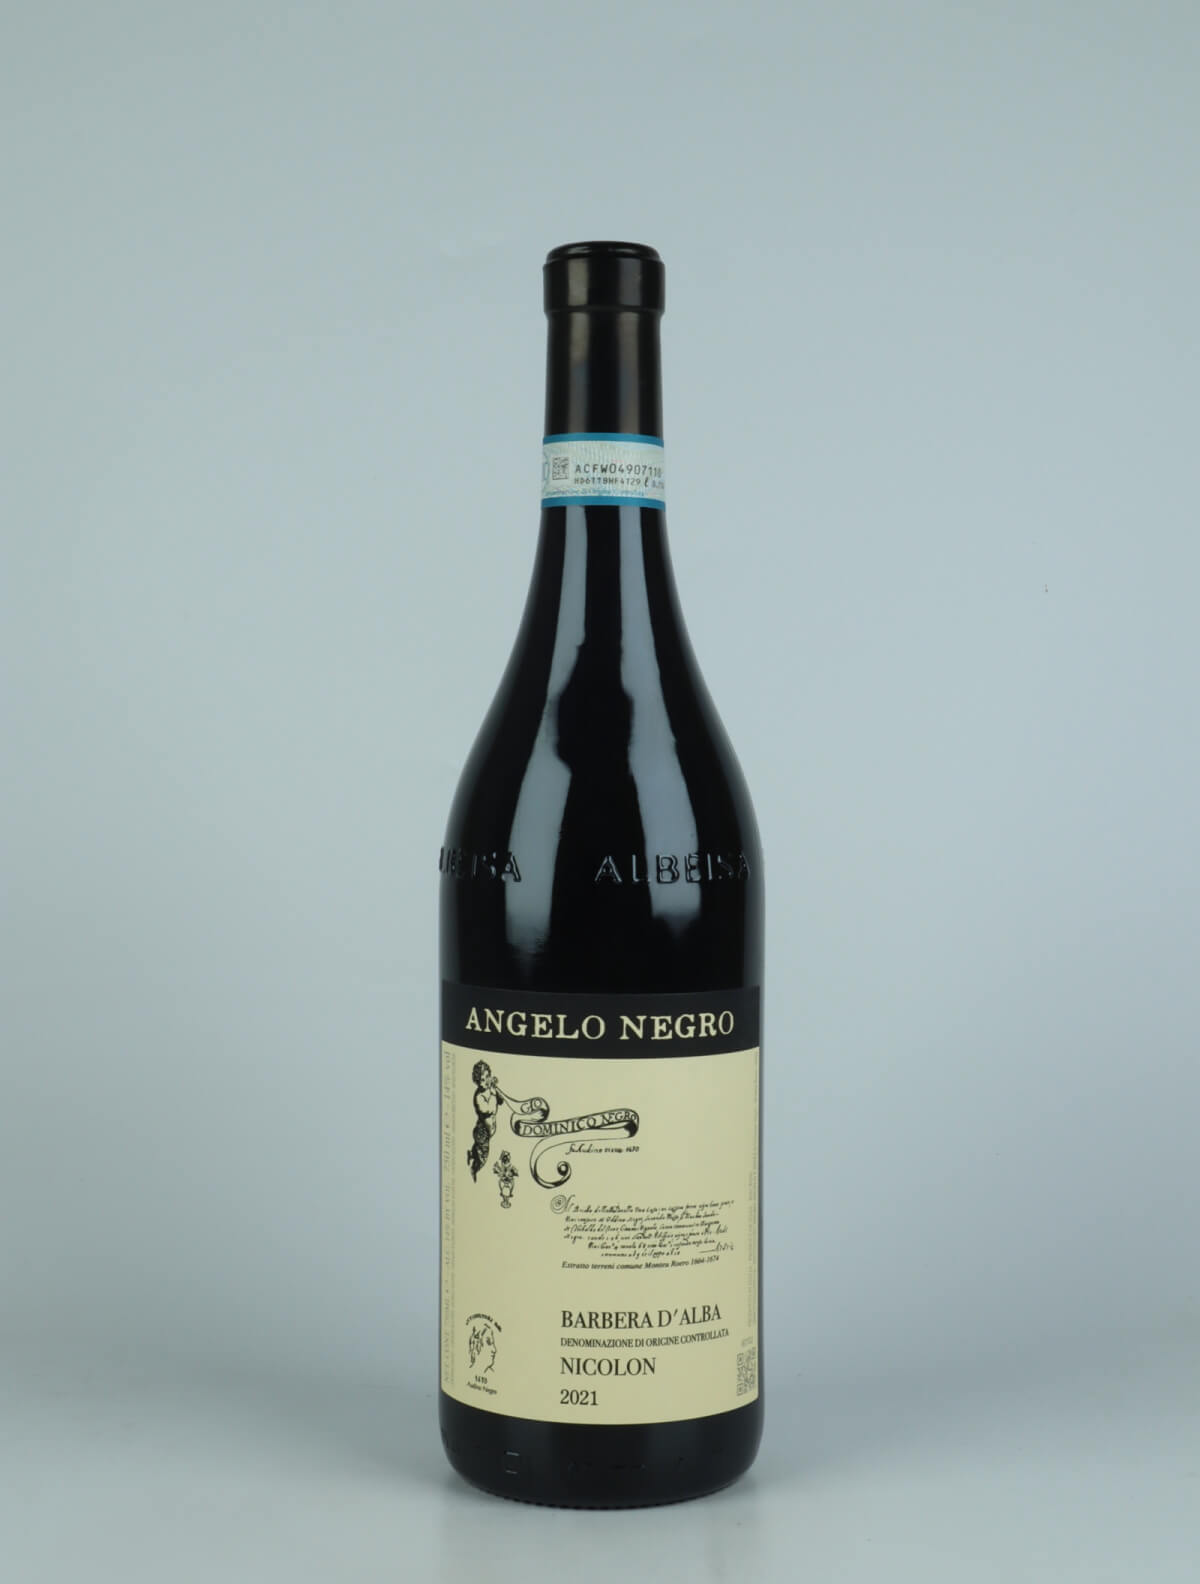 A bottle 2021 Barbera d'Alba - Nicolon Red wine from Angelo Negro, Piedmont in Italy